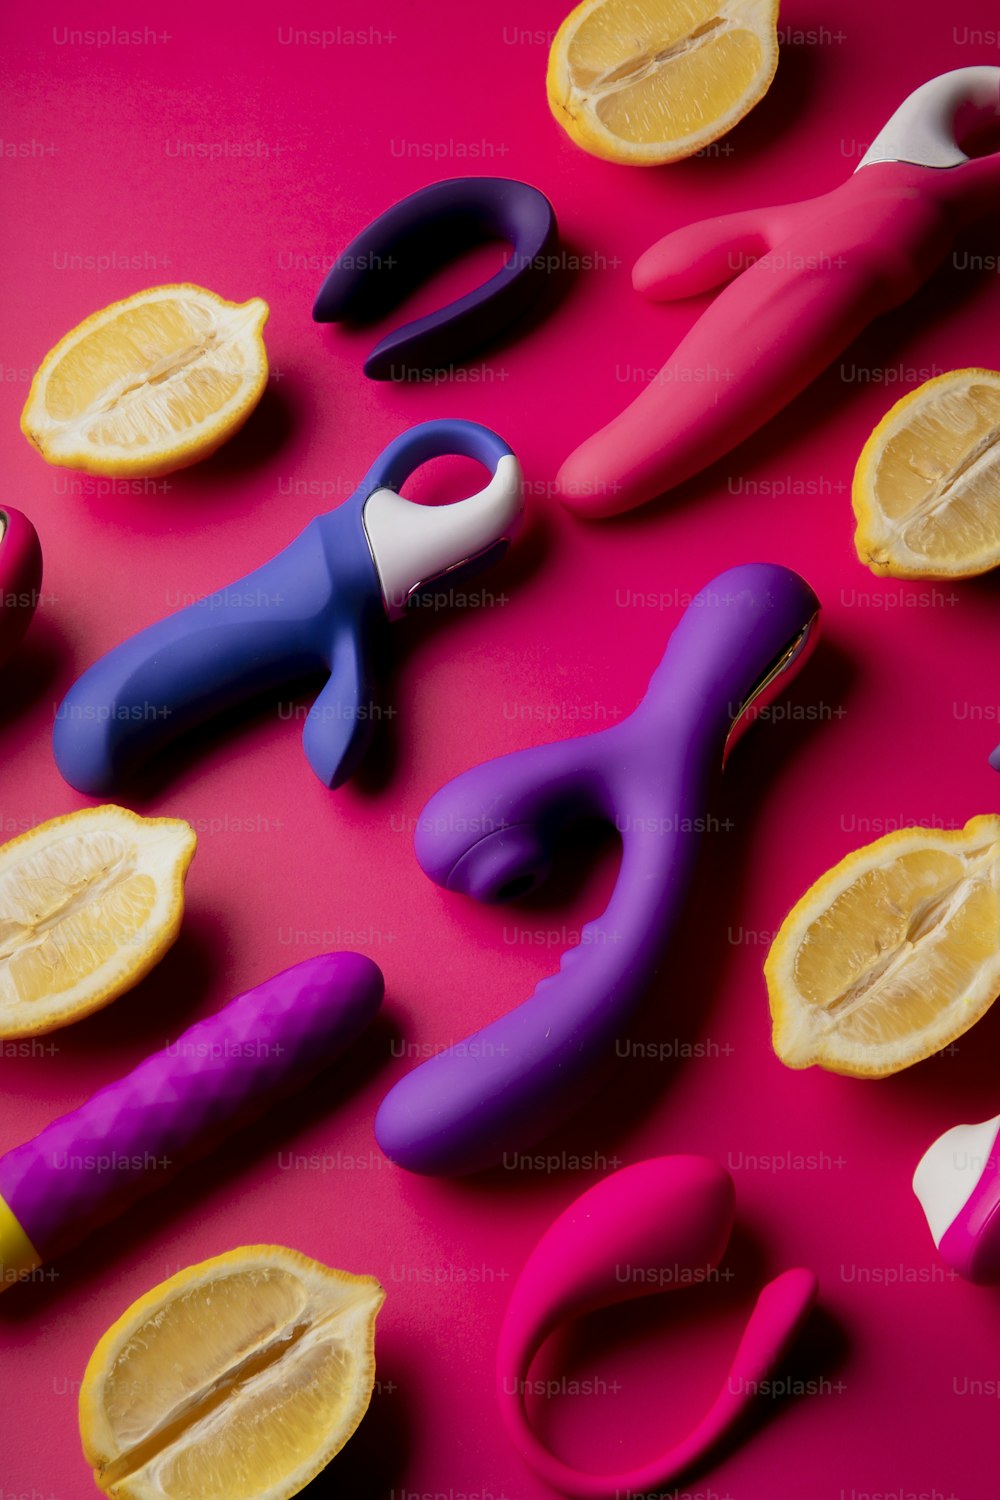 a group of scissors and lemon slices on a pink surface